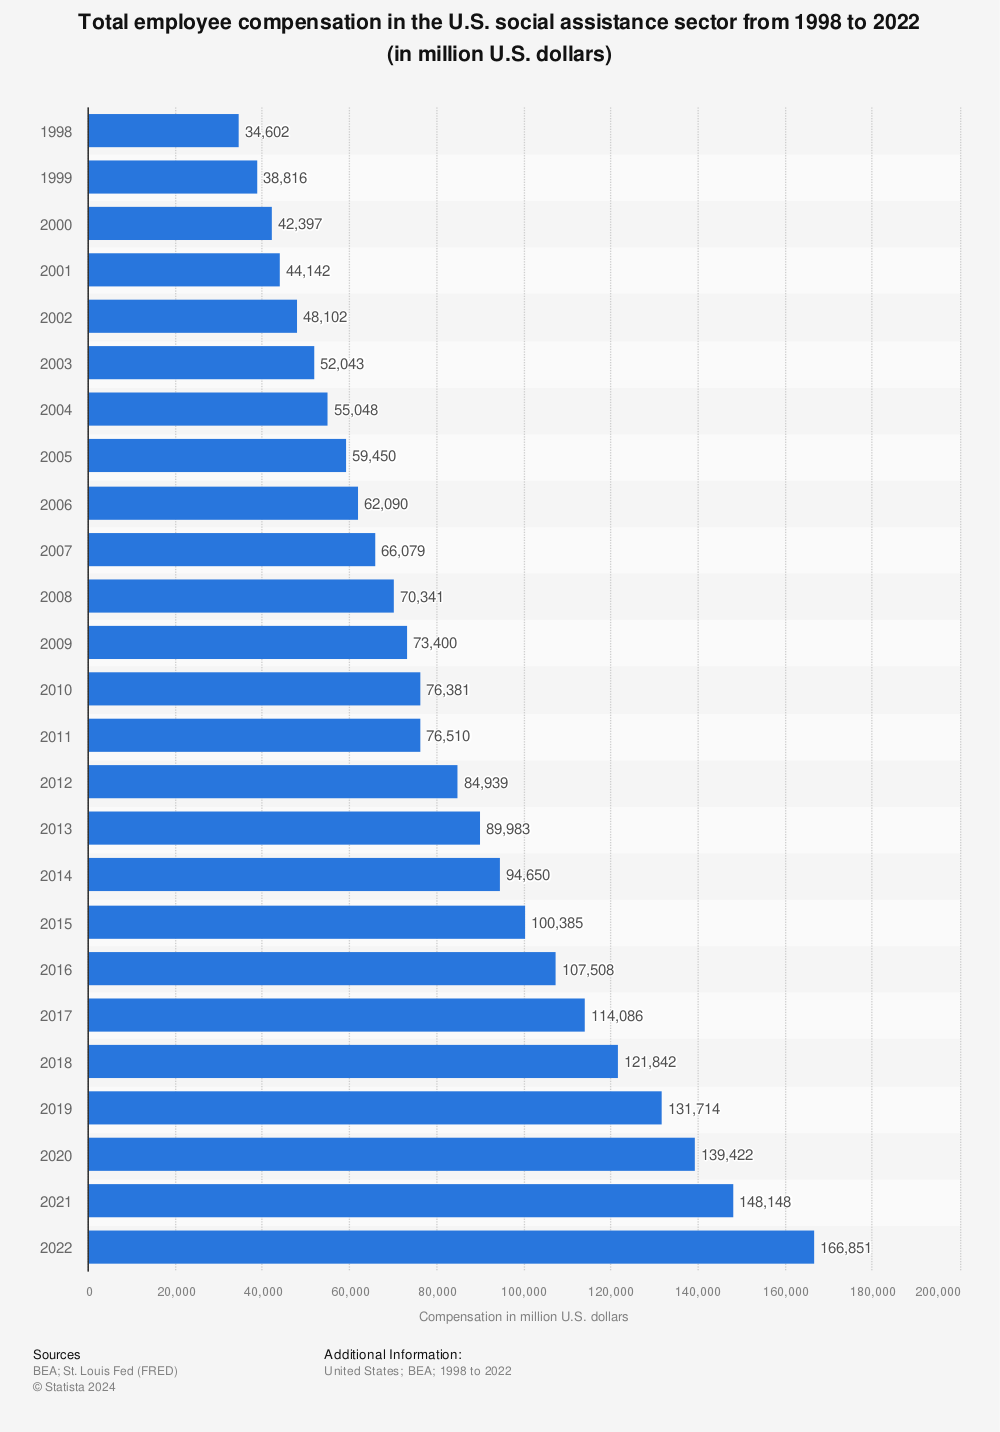 Statistic: Total employee compensation in the U.S. social assistance sector from 1998 to 2020 (in million U.S. dollars) | Statista